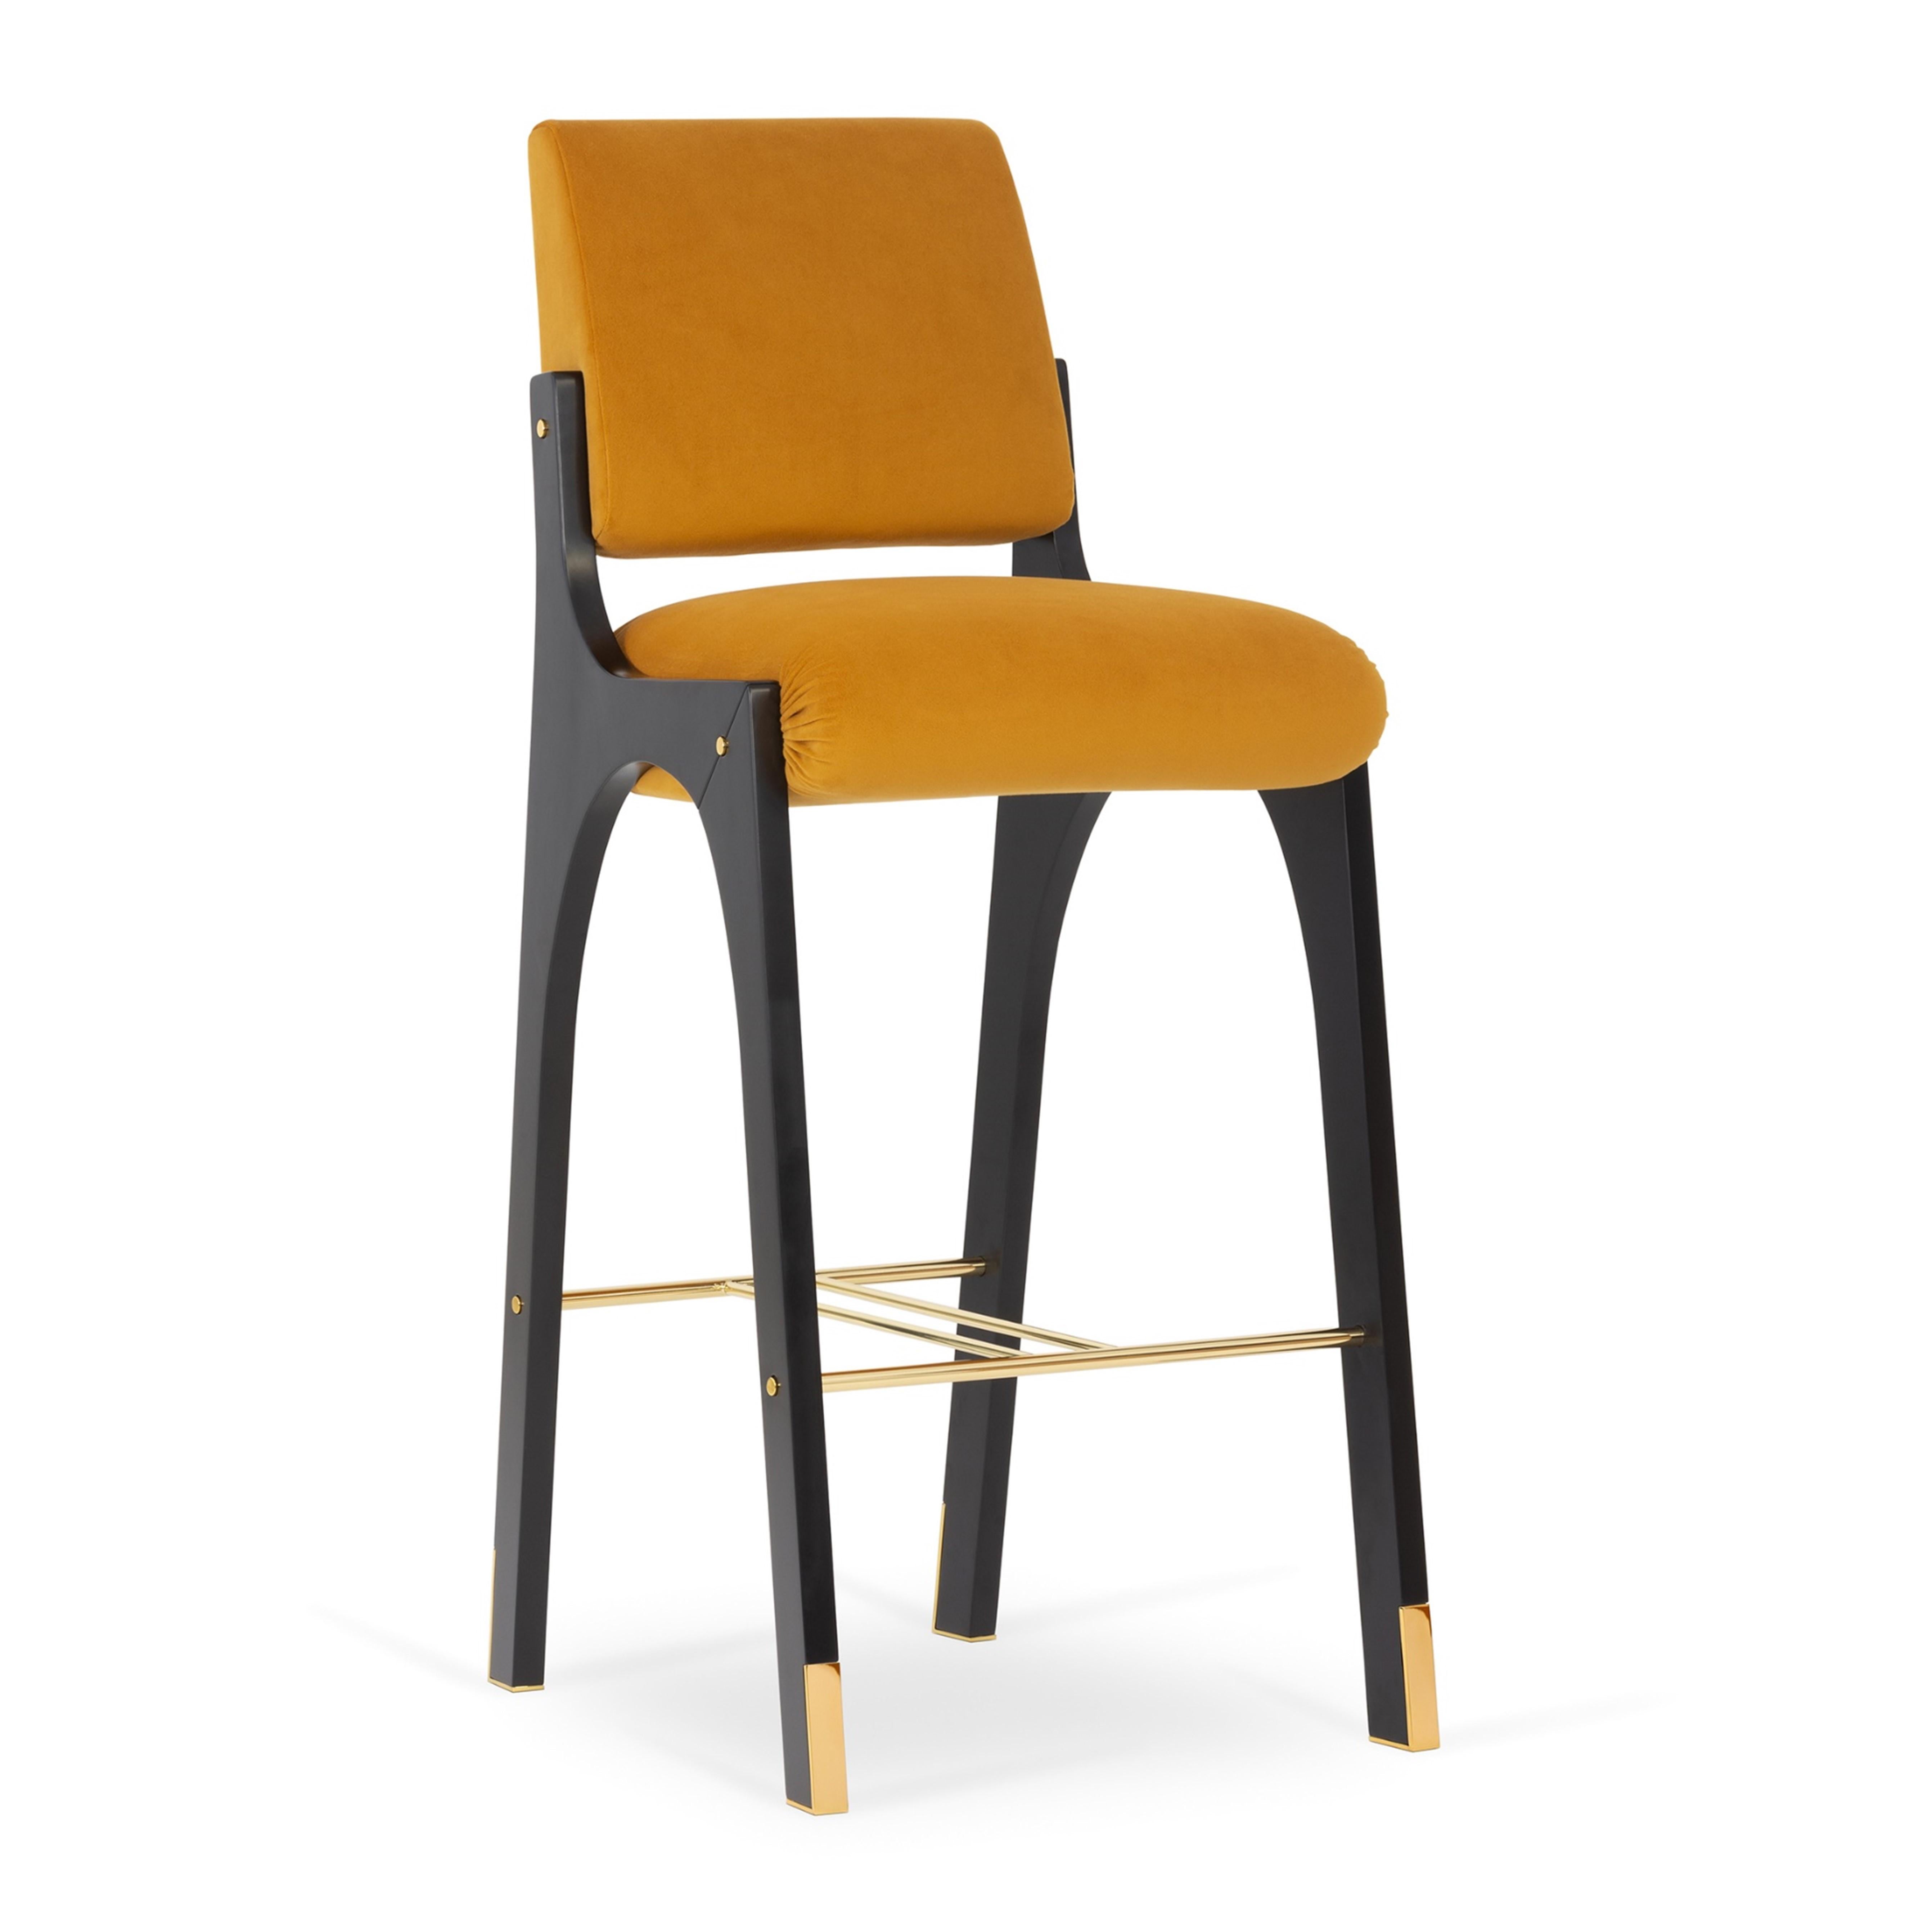 The Arches II counter stool is designed in the likeness of the architectural scale that suggests a crossing through the structures of a utopian city, organized by the principles of symmetry and ideal forms.

The Arches II counter stool is a redesign